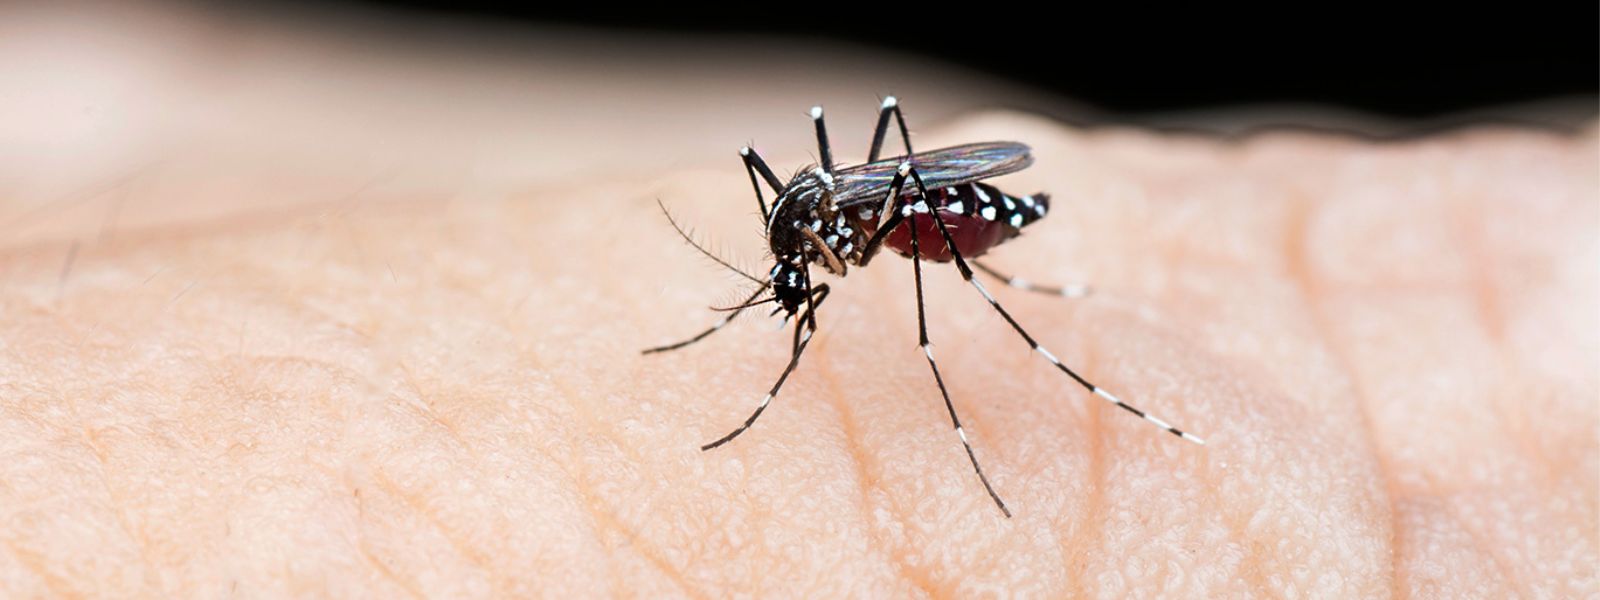 Reduction in the number of Dengue patients